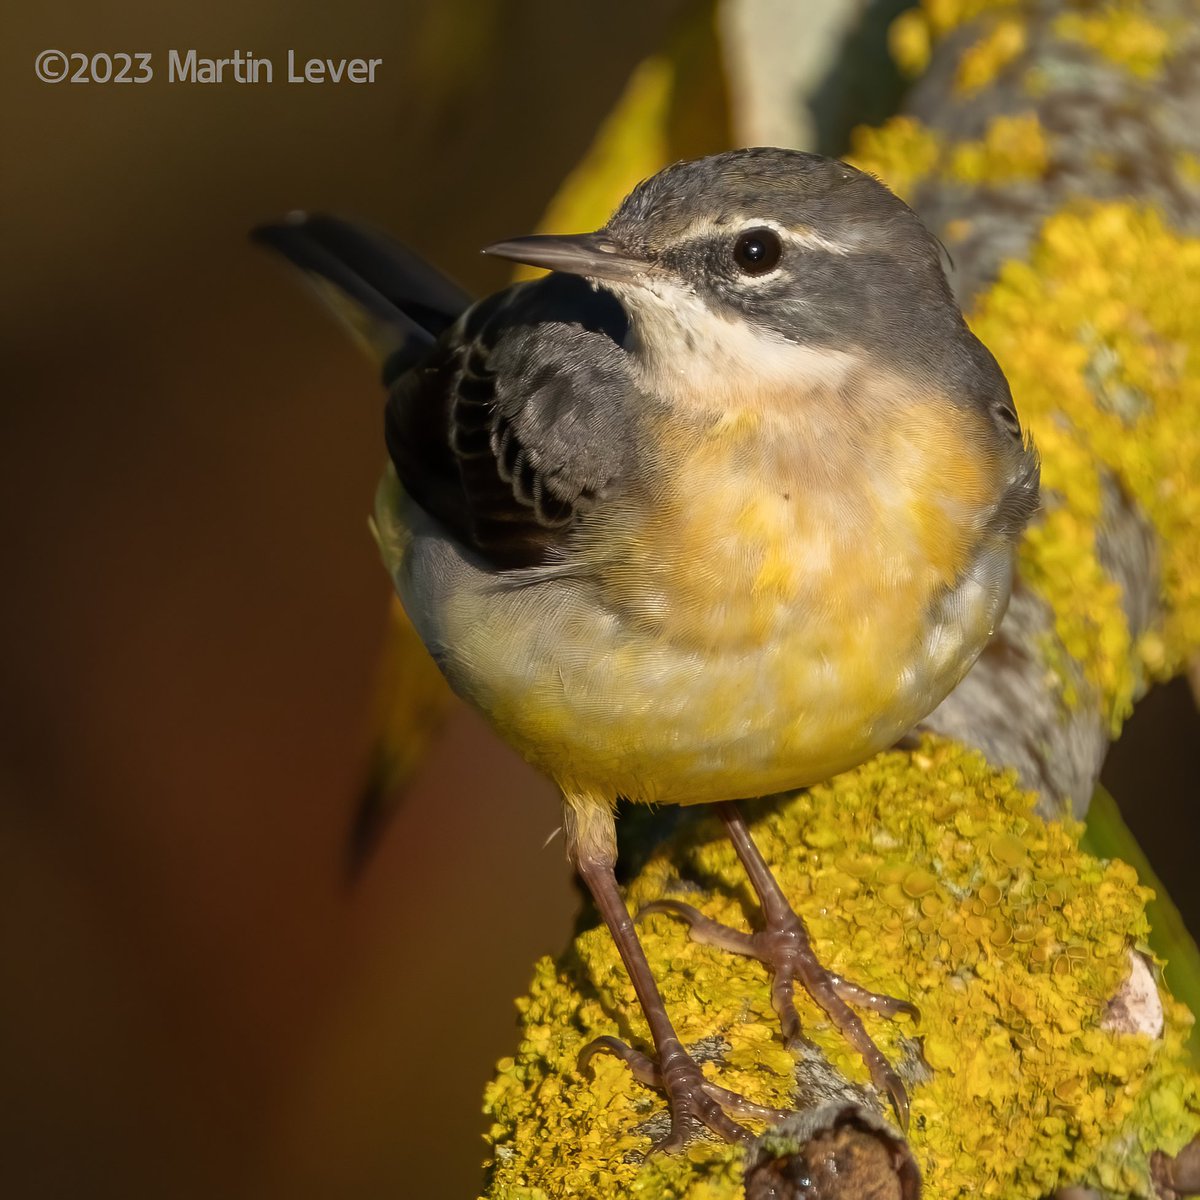 #GreyWagtail by the River Tone #Taunton #Somerset